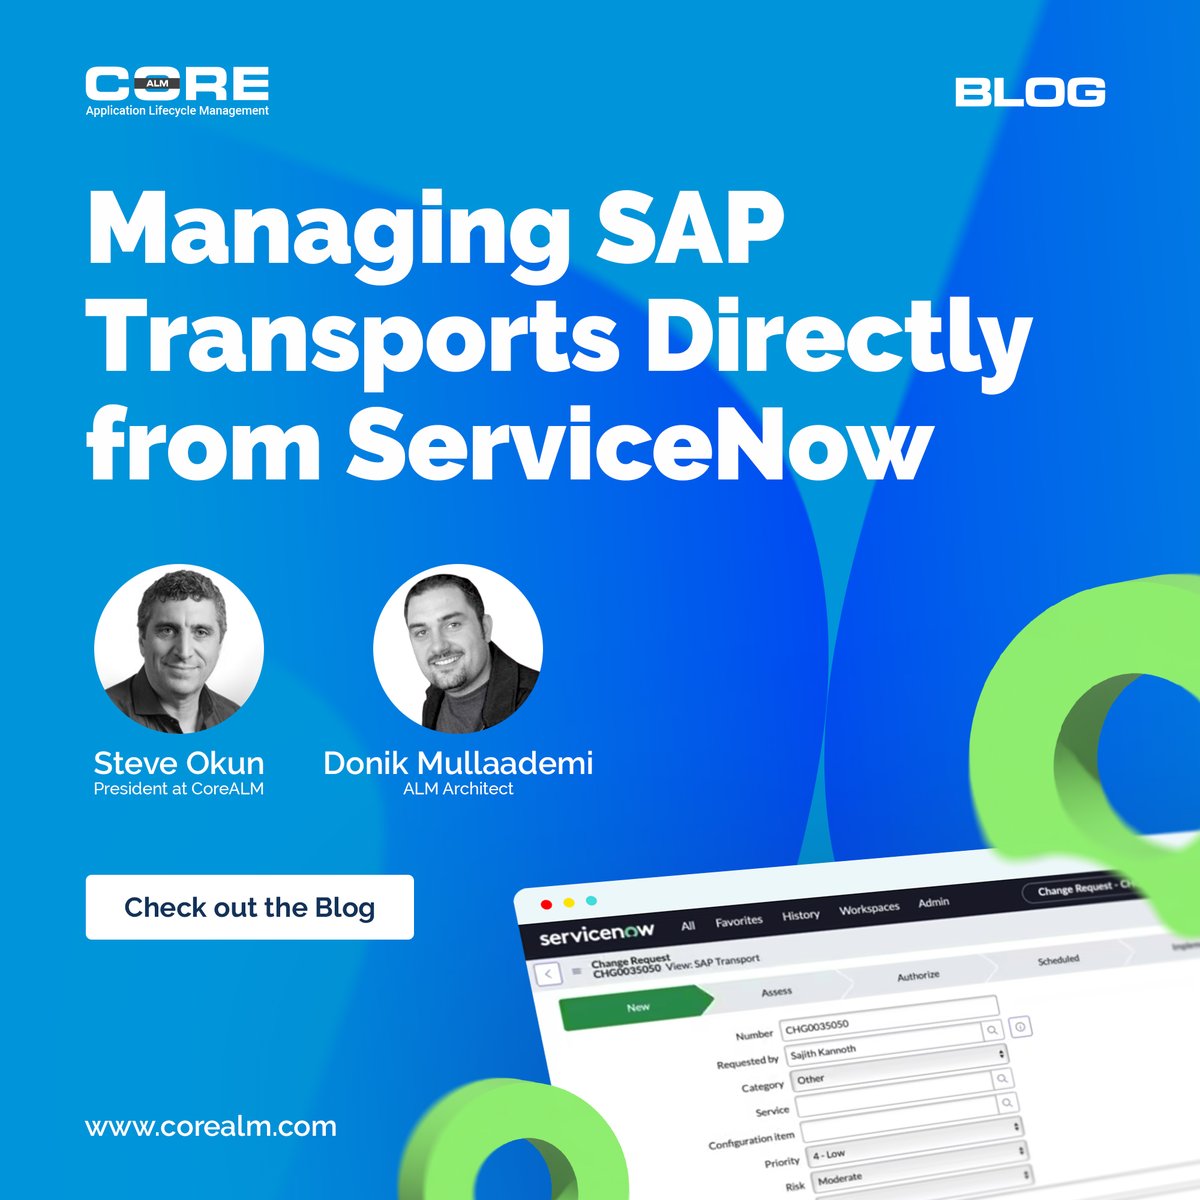 Check out our latest blog post on the new ServiceNow connector for SAP Transports. Streamline your processes and improve efficiency with this integration. 

Click the link to learn more: hubs.ly/Q02xzRkl0

#SAP #SAPSAPPHIRE #transport #CoreALM #CloudALM